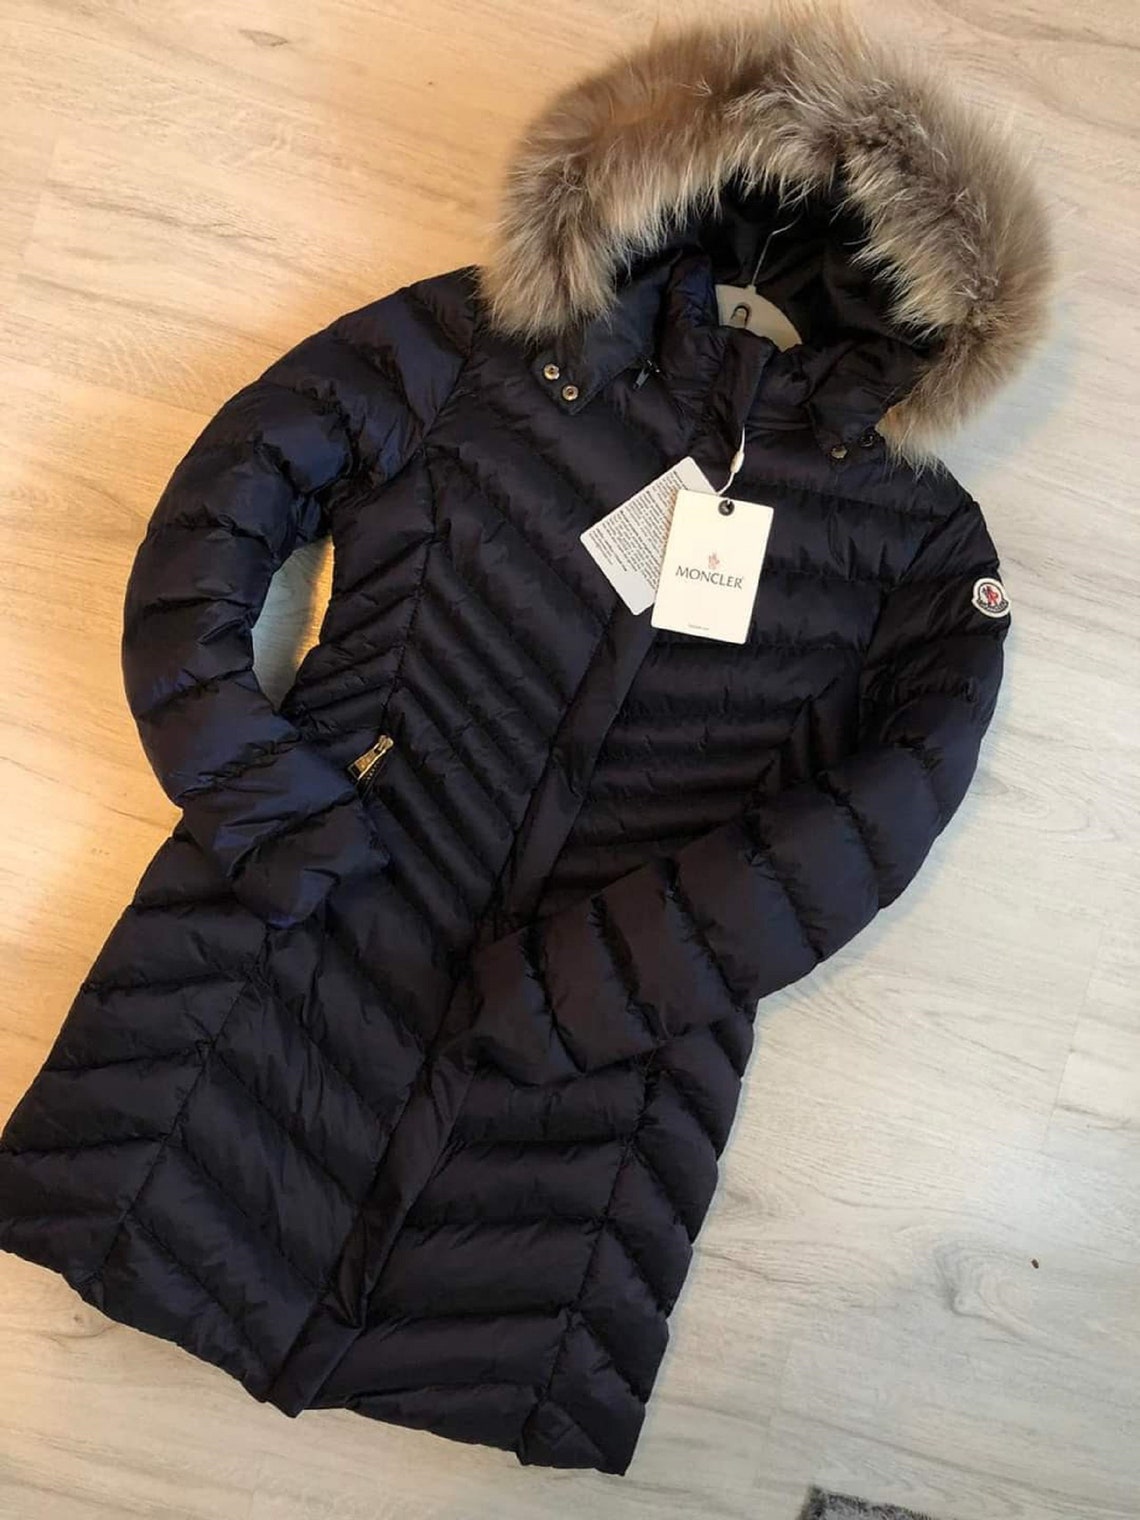 Moncler Jacket for womensize 1/S | Etsy